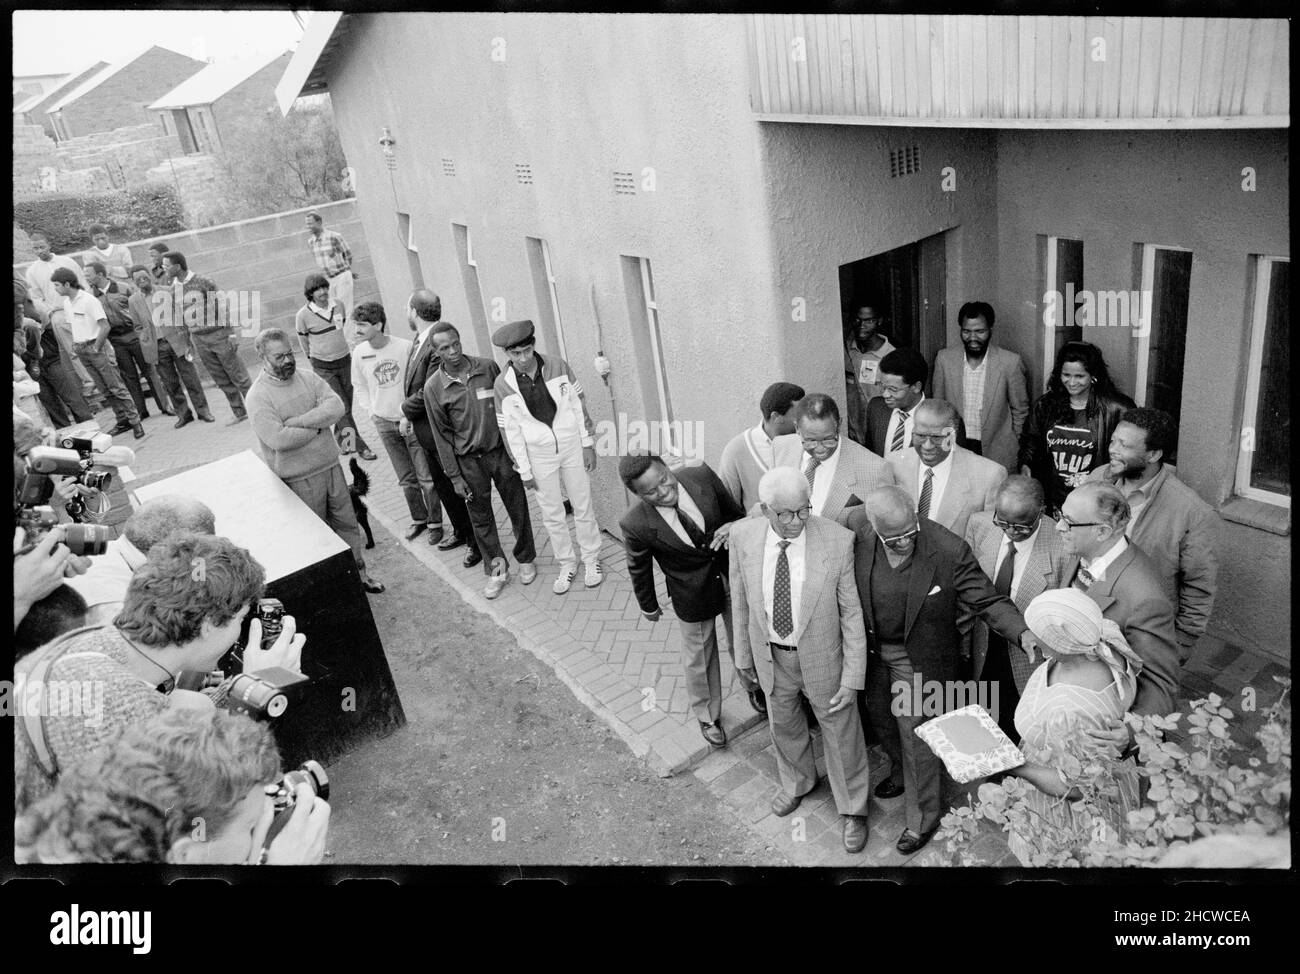 On 15 October 1989 Ahmed Kathrada, along with Jeff Masemola, Raymond Mhlaba, Billy Nair, Wilton Mkwayi, Andrew Mlangeni, Elias Motsoaledi, Oscar Mpetha, and Walter Sisulu were released from Johannesburg prison.    The return to Bettina and Walter Sisulu's  house in Soweto, Desmond Tutu attended. *** Local Caption *** Ahmed Mohammed Kathrada (or 'Kathy' as he is popularly known) was born in 1929 to Indian immigrants in a rural town in South Africa Stock Photo